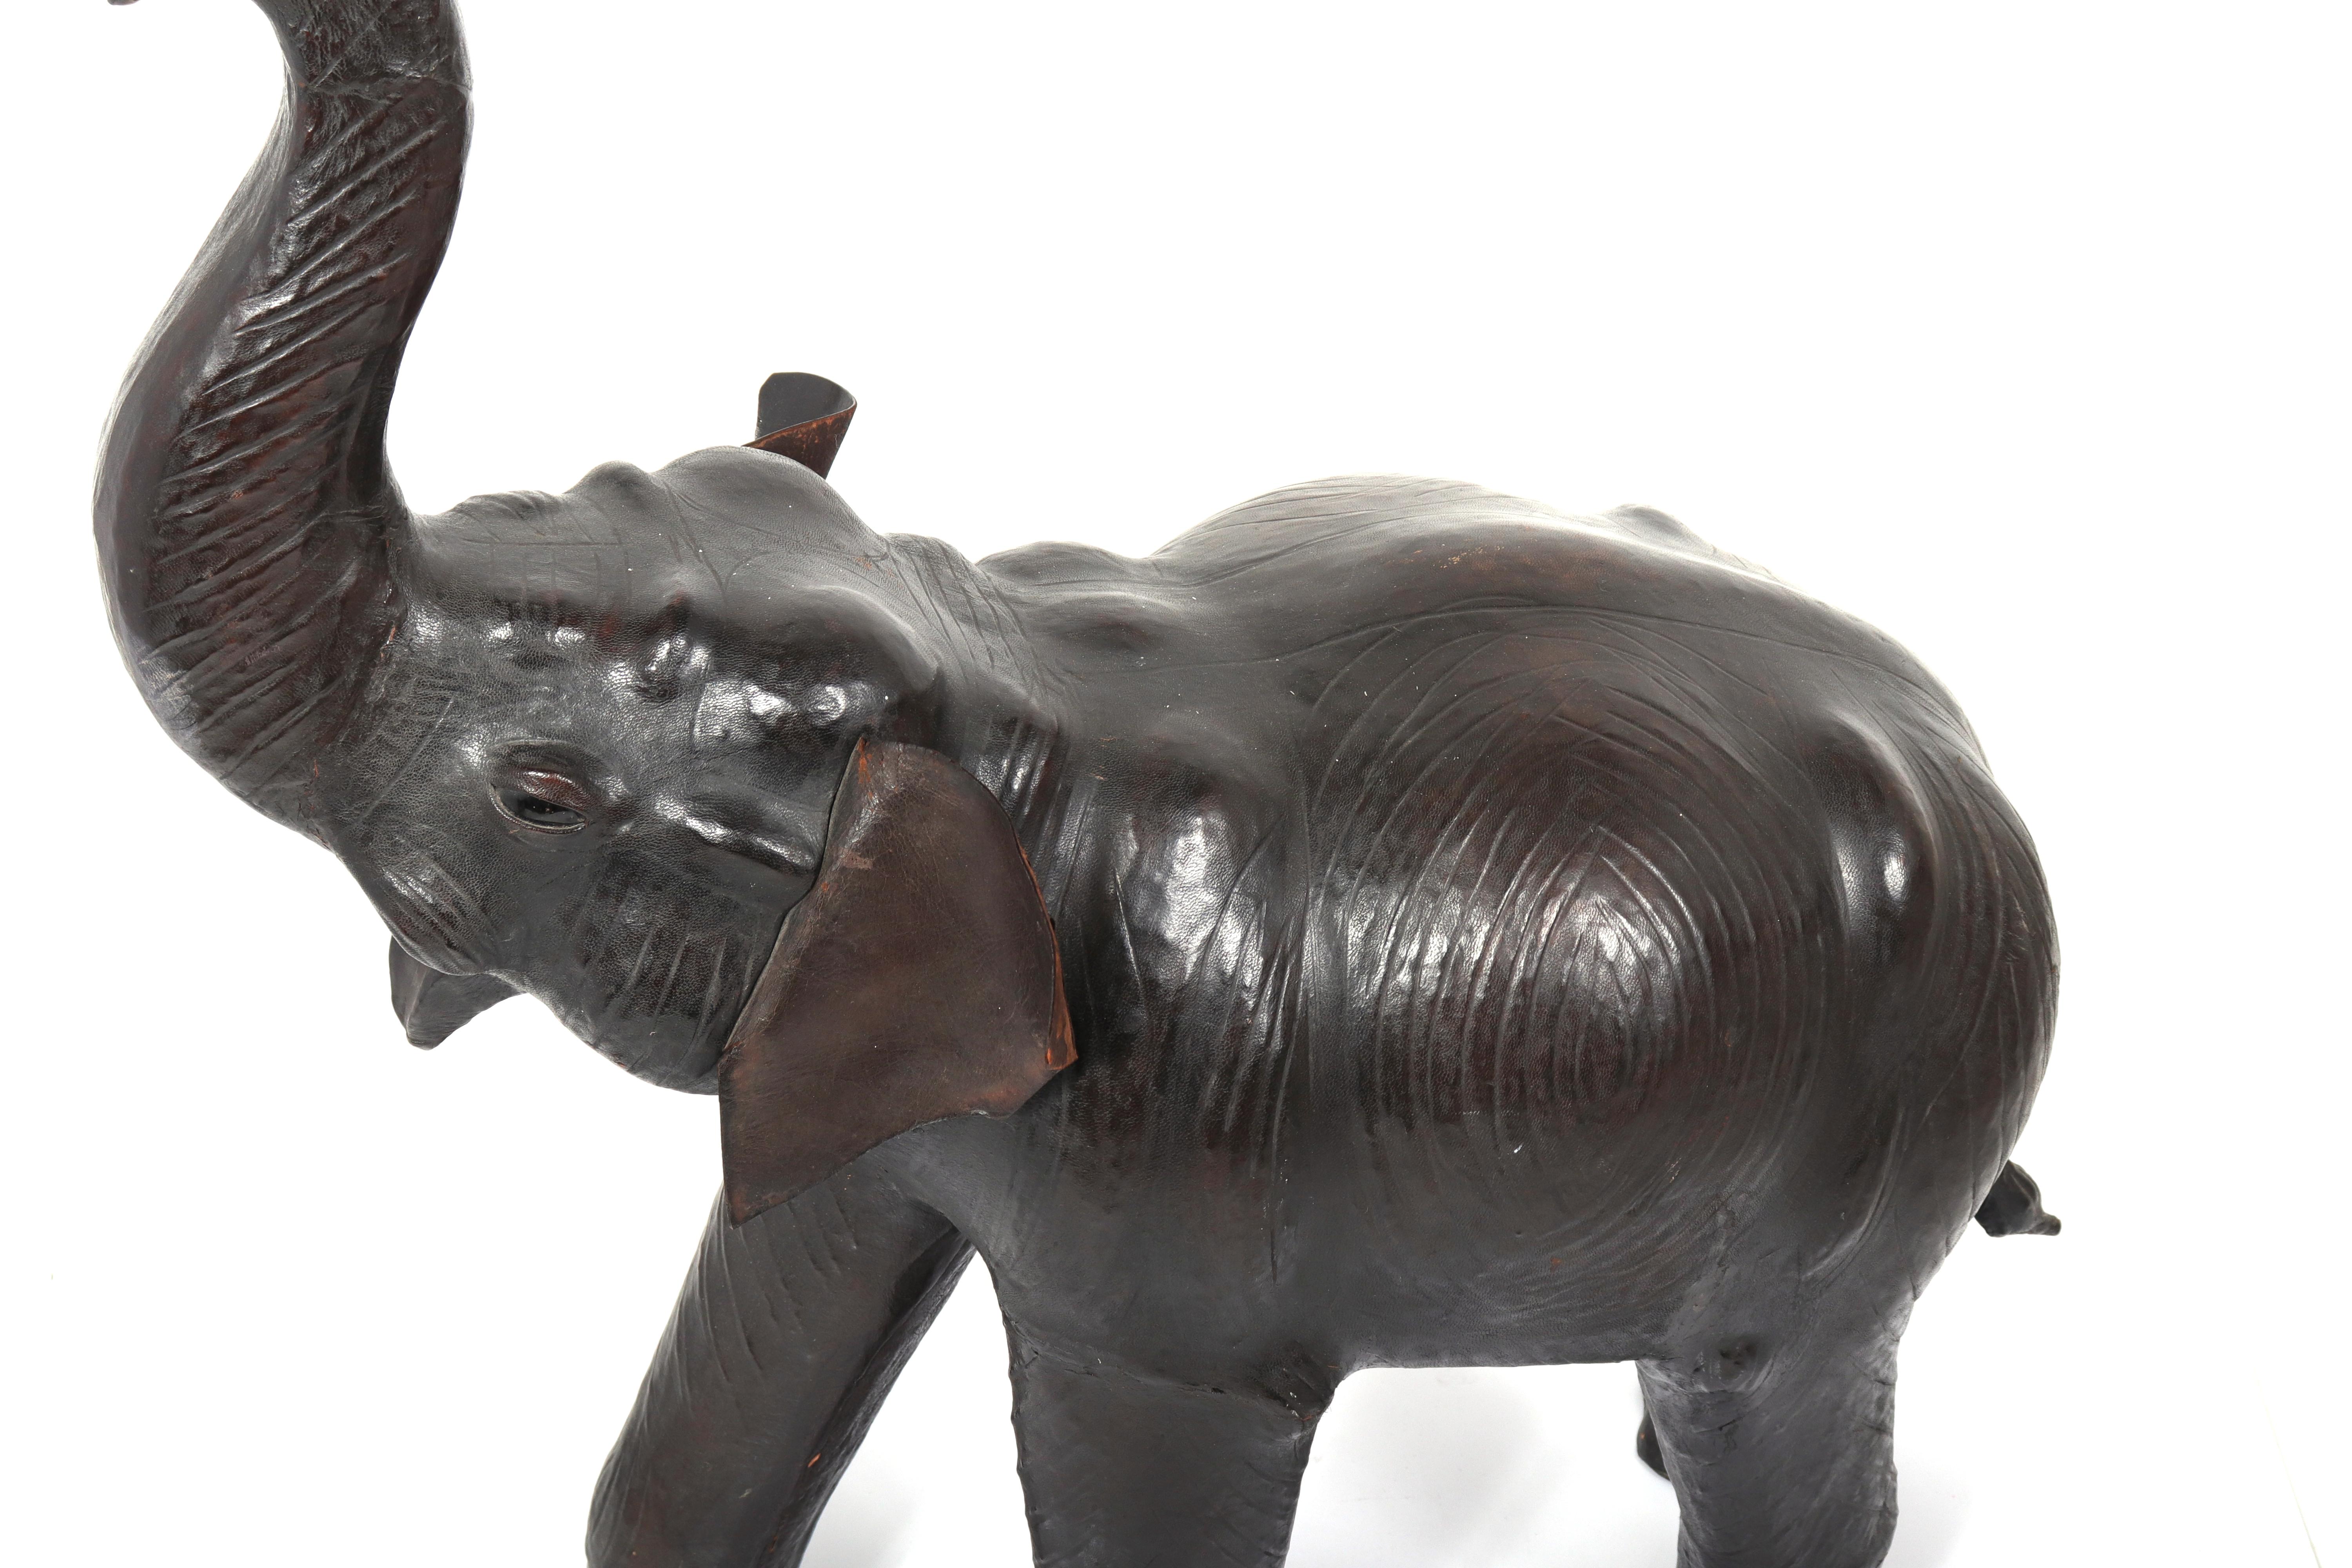 Large modern leather-clad elephant sculpture. The piece is in great vintage condition with minor wear to leather including edges of ears and missing tusks.